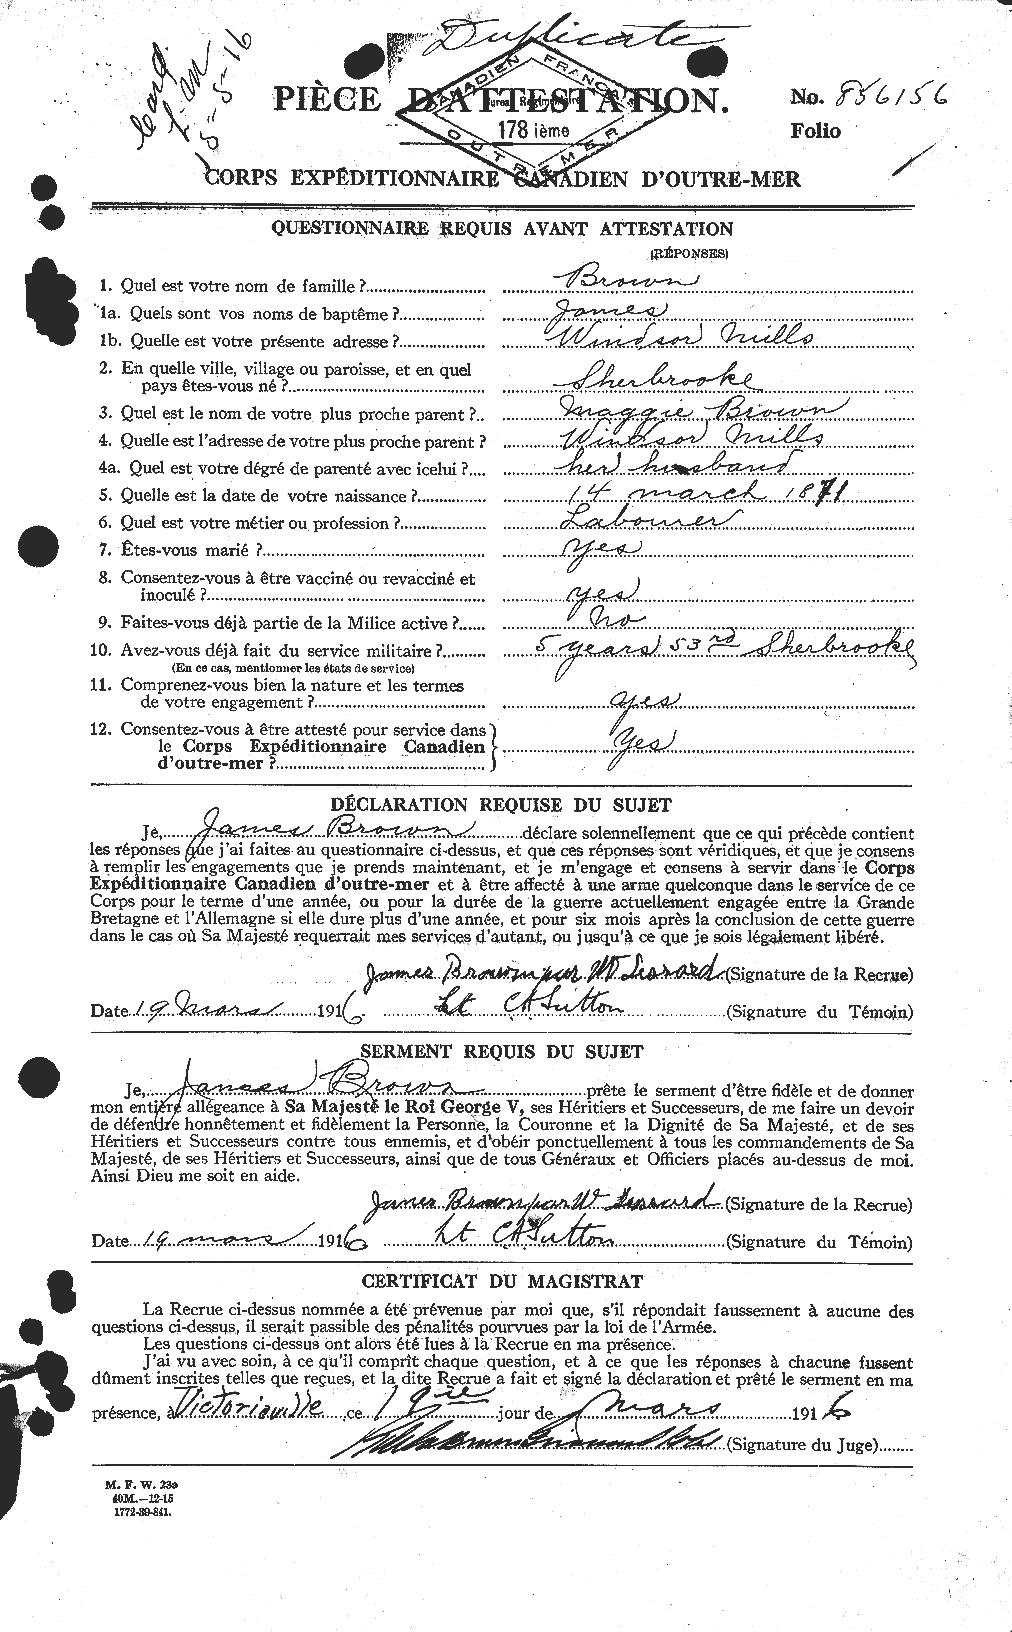 Personnel Records of the First World War - CEF 265741a